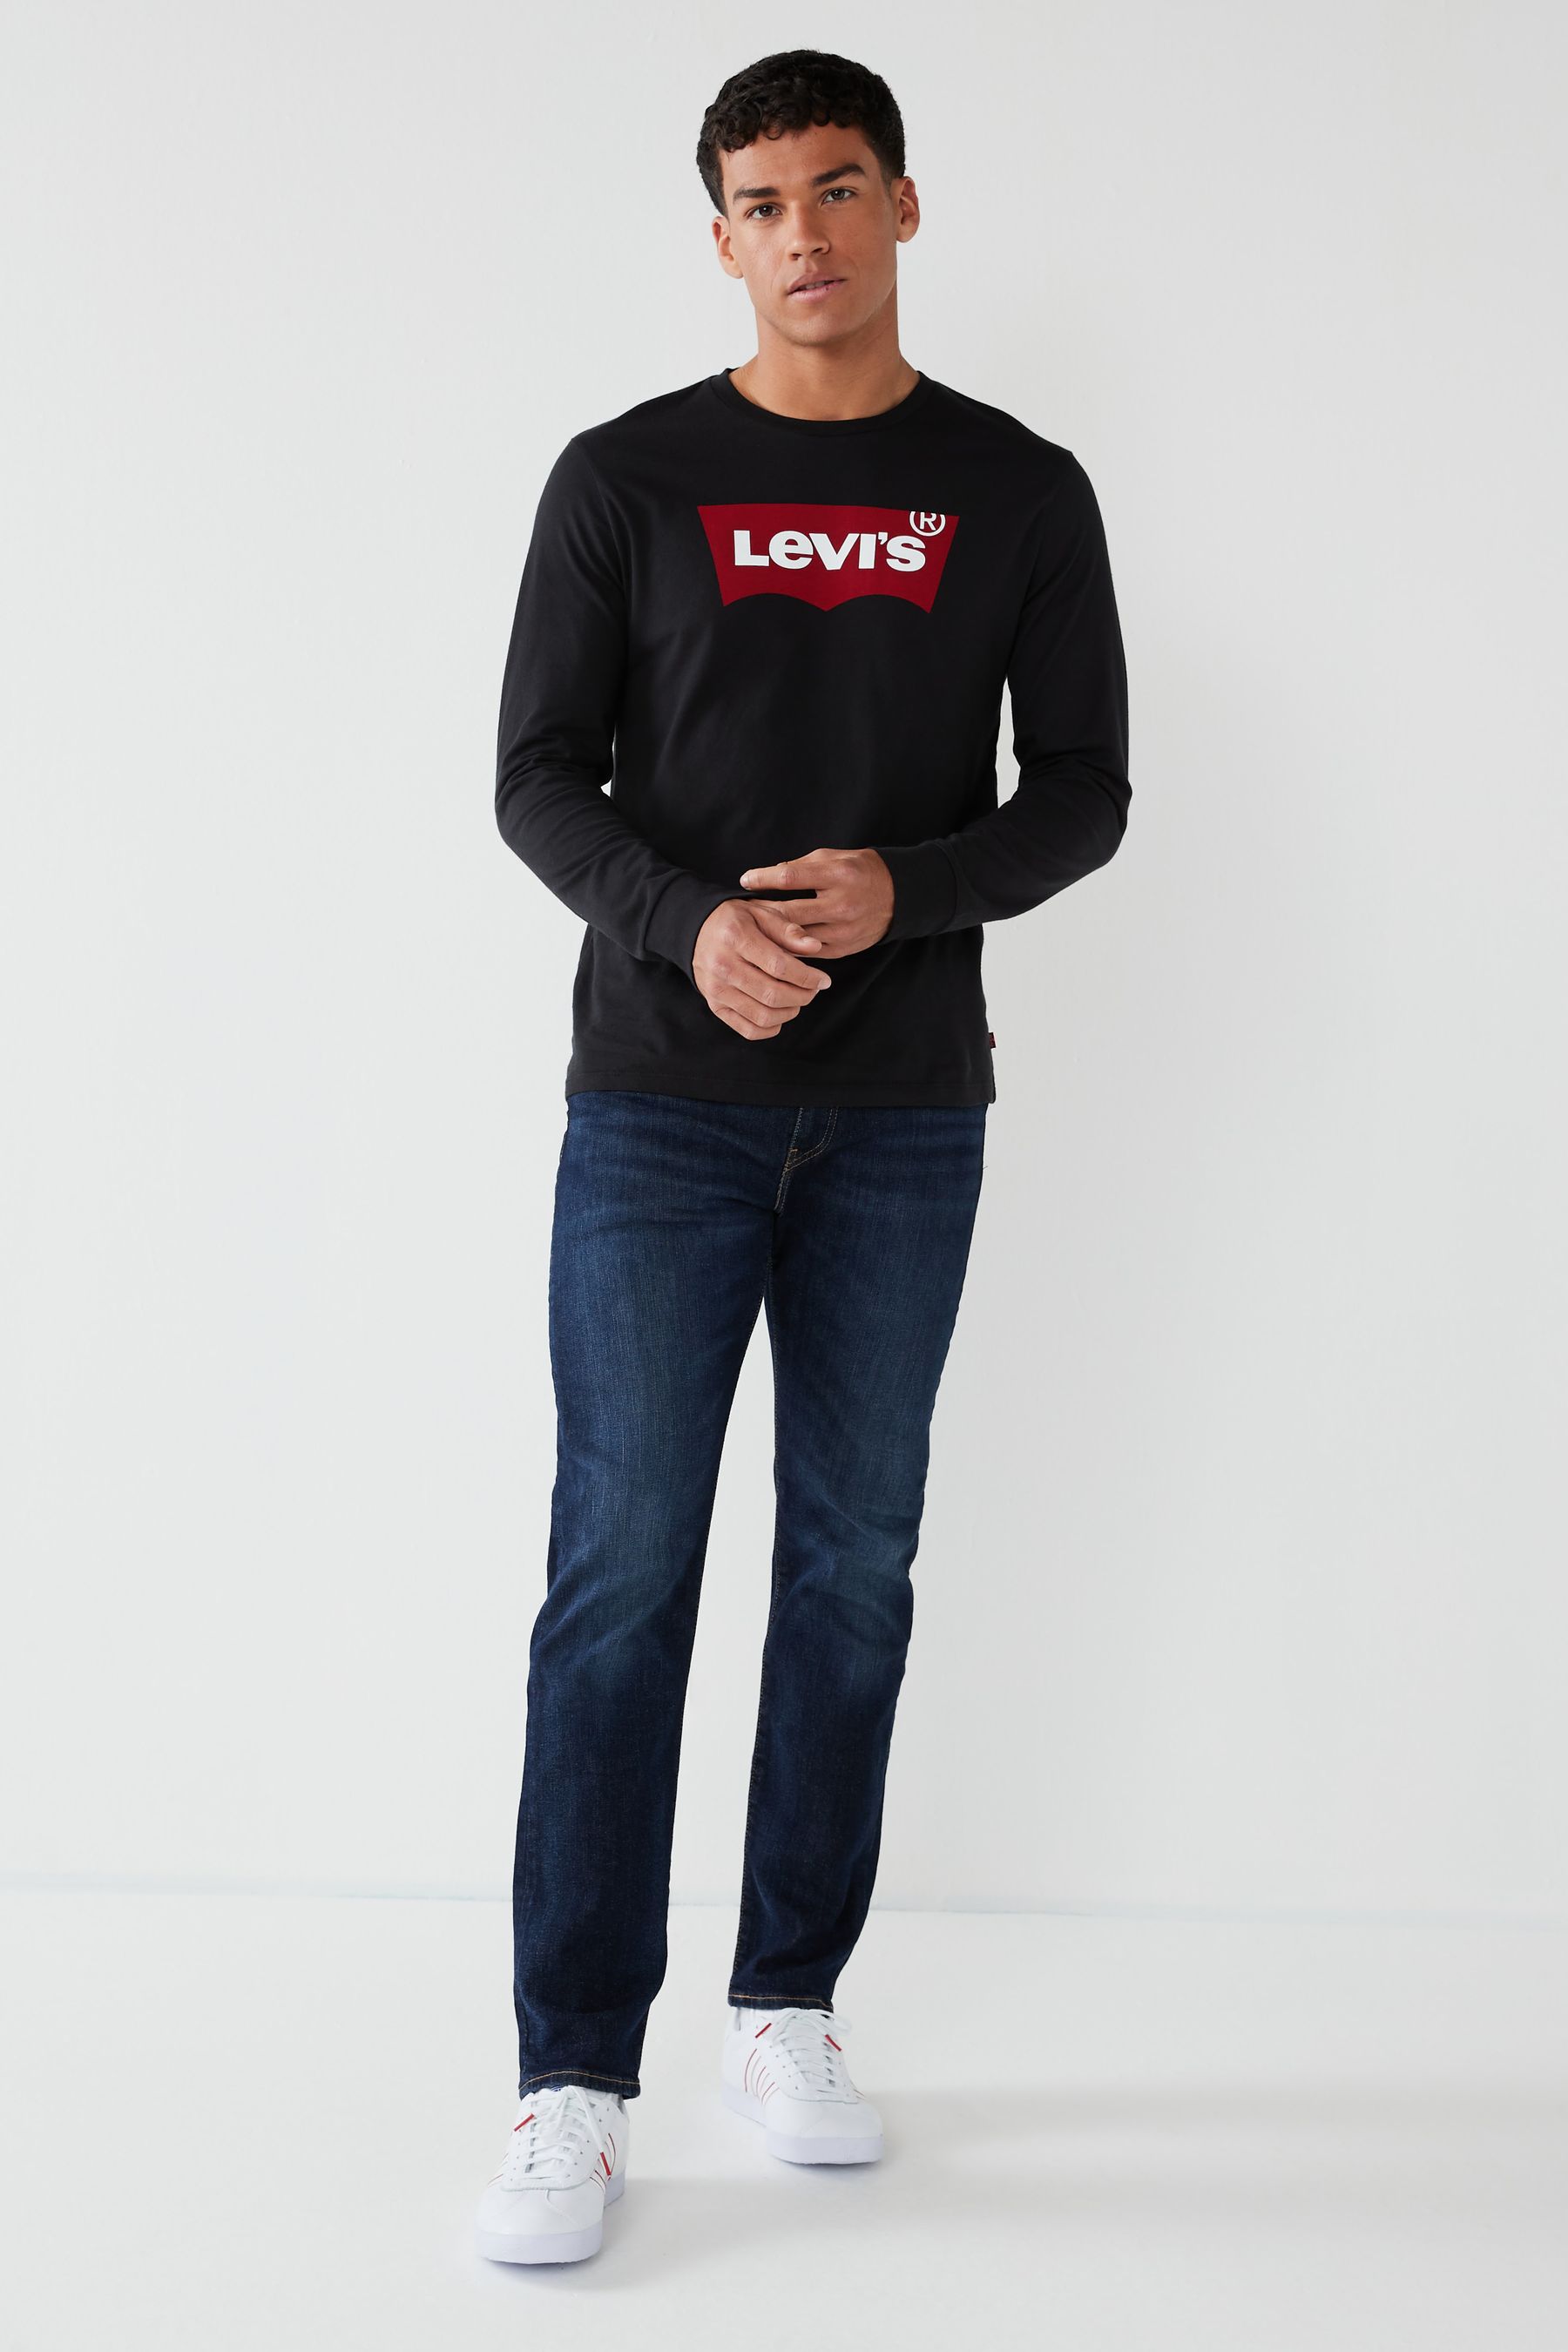 Buy Levi's® Biologia Adv 502™ Tapered Jeans from the Next UK online shop